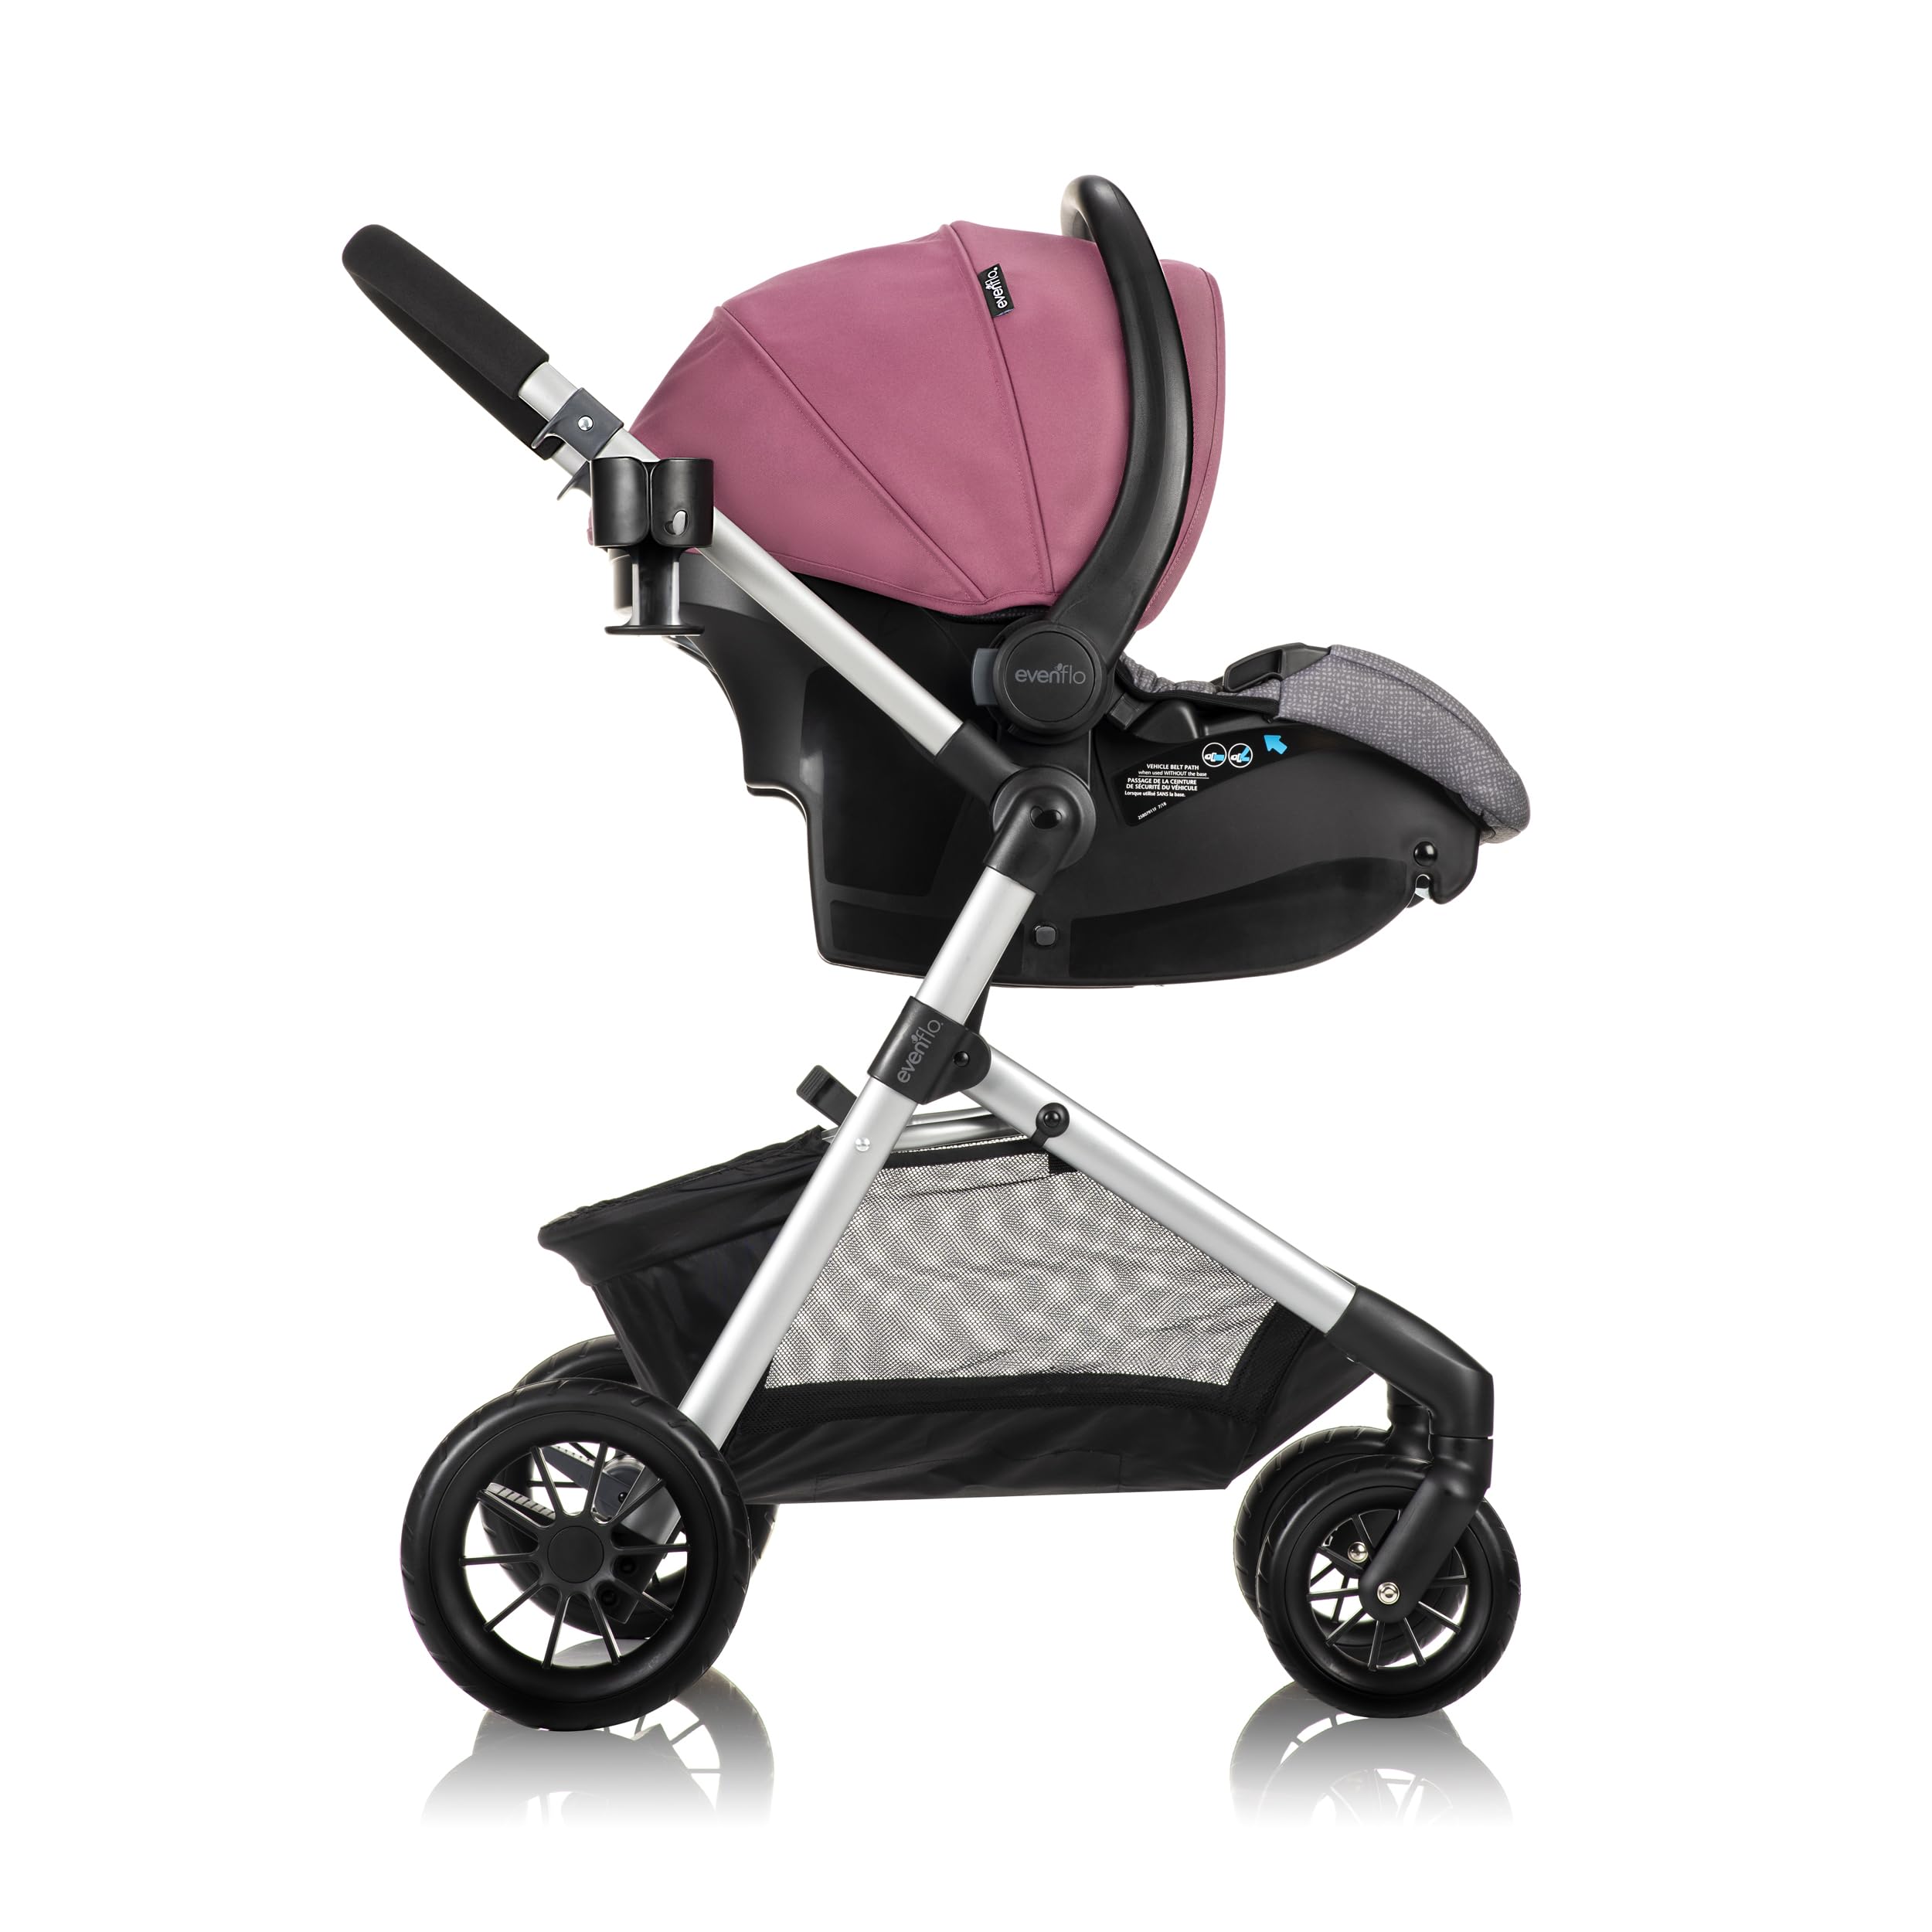 Evenflo Pivot Modular Travel System with LiteMax Infant Car Seat with Anti-Rebound Bar (Dusty Rose Pink)